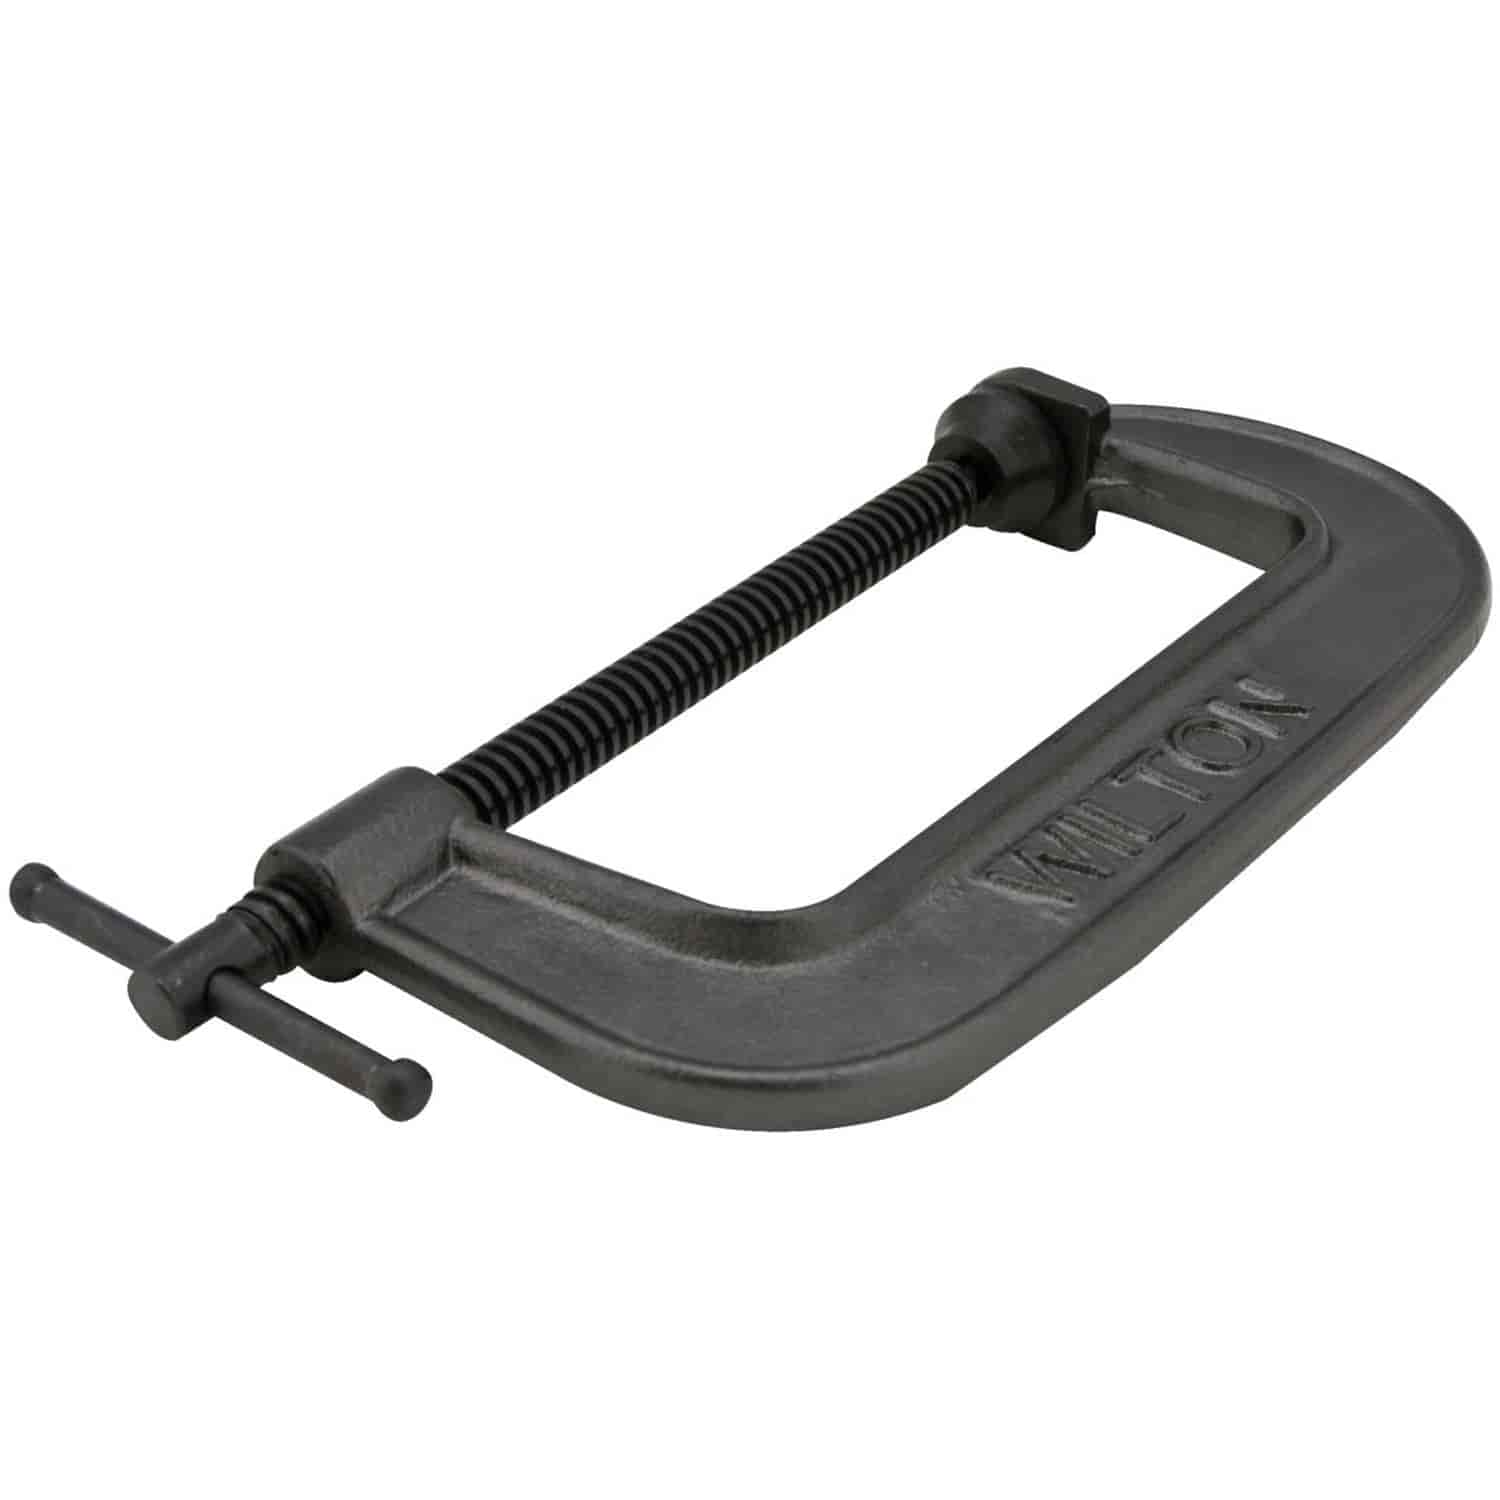 540A Series C-Clamp Opening Capacity Max: 8"